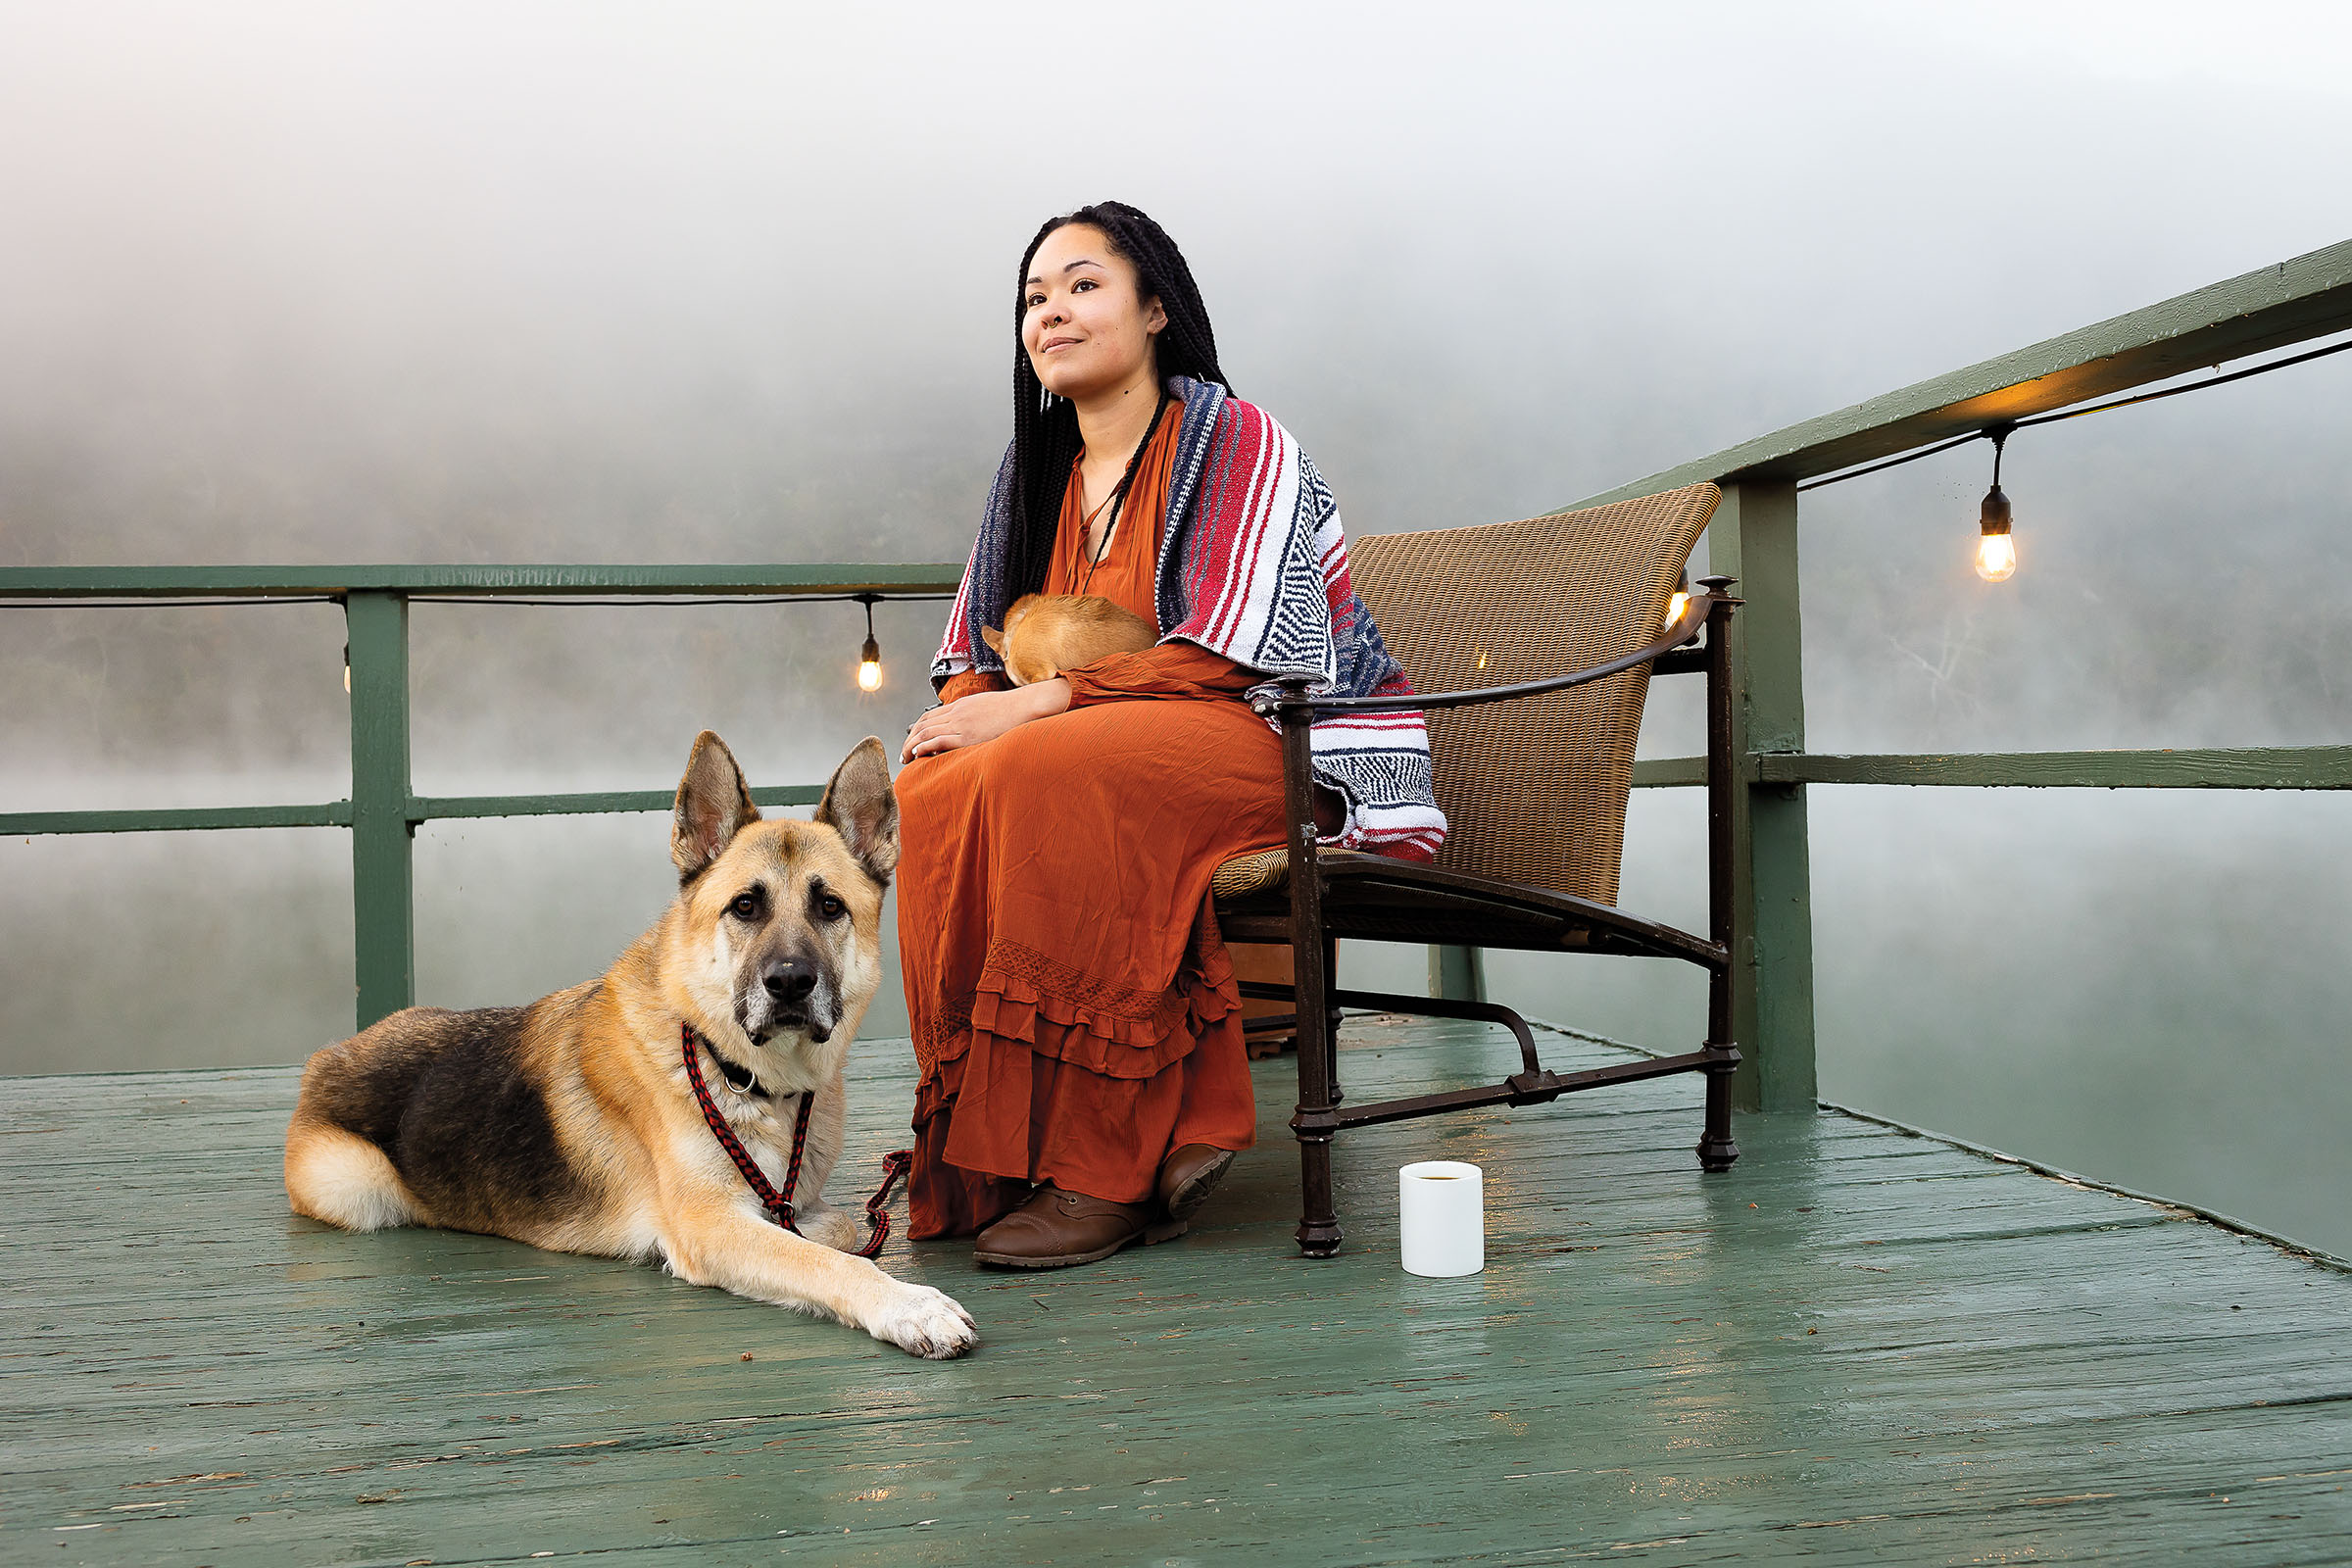 A woman in a long orange skirt and blanket sits in a chair next to her dog in foggy lighting